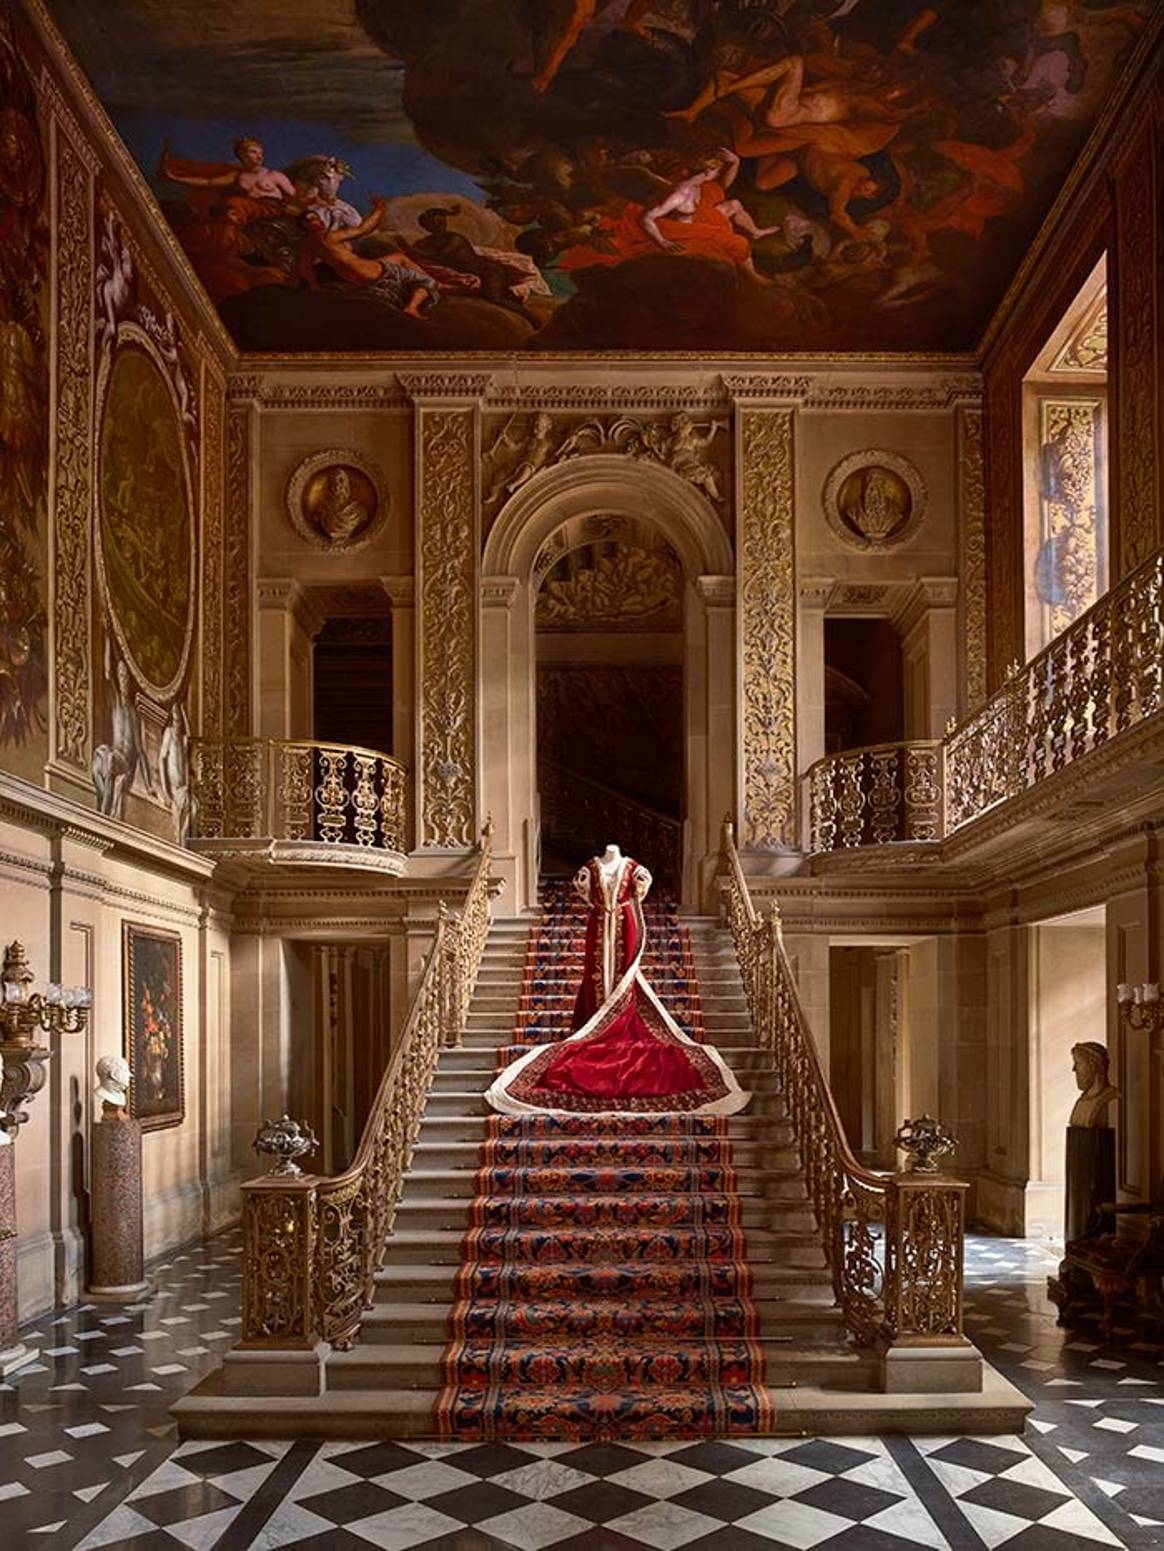 Chatsworth House to host fashion exhibition